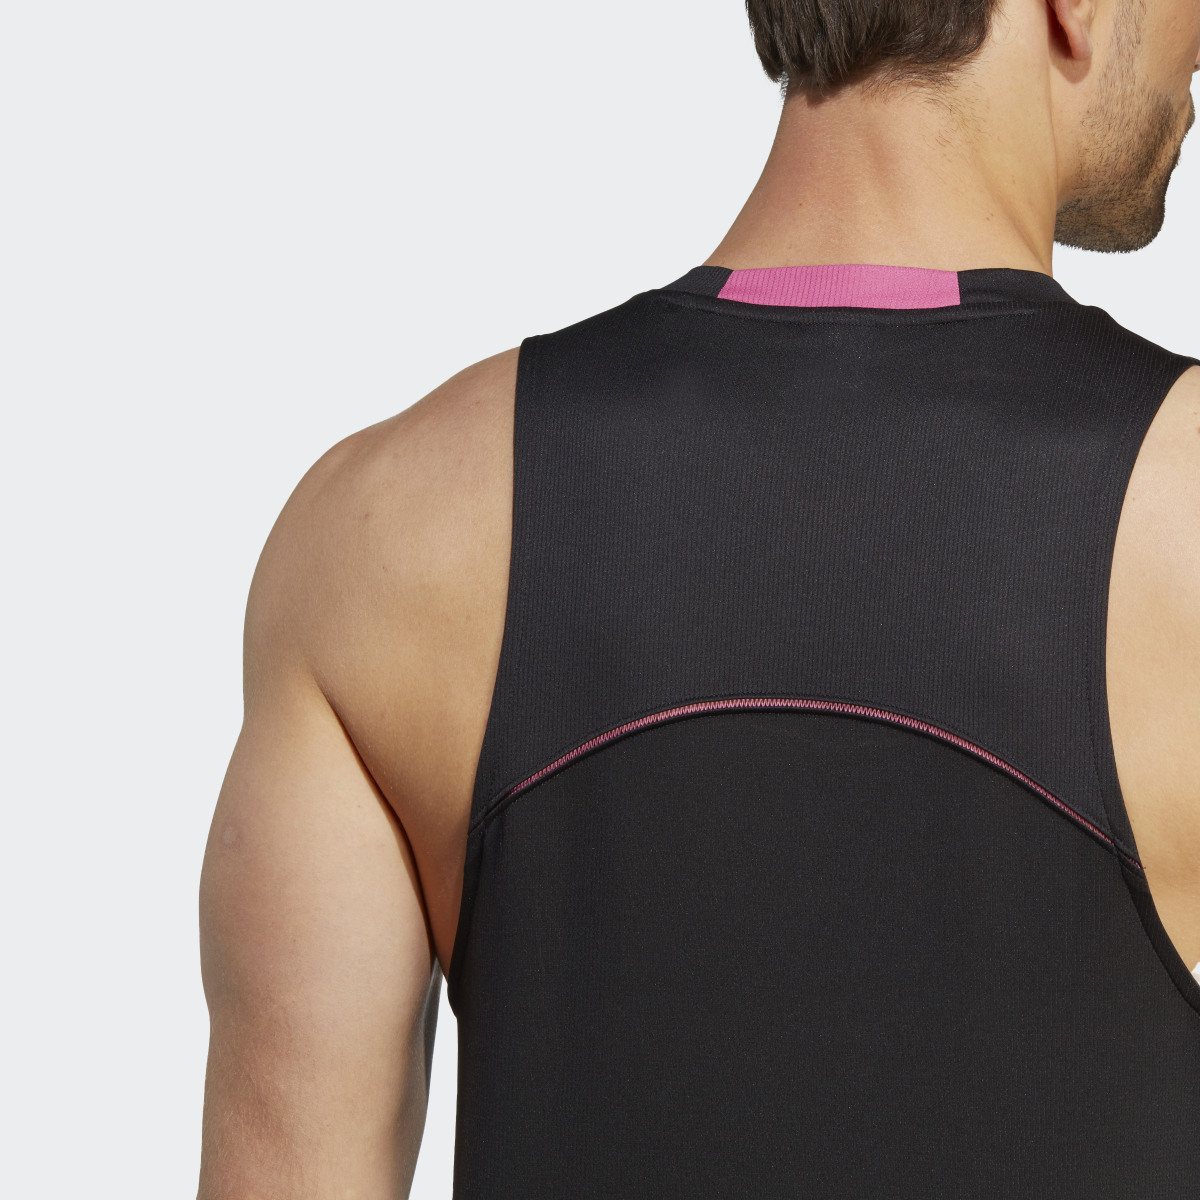 Adidas Designed for Movement HIIT Training Tank Top. 6